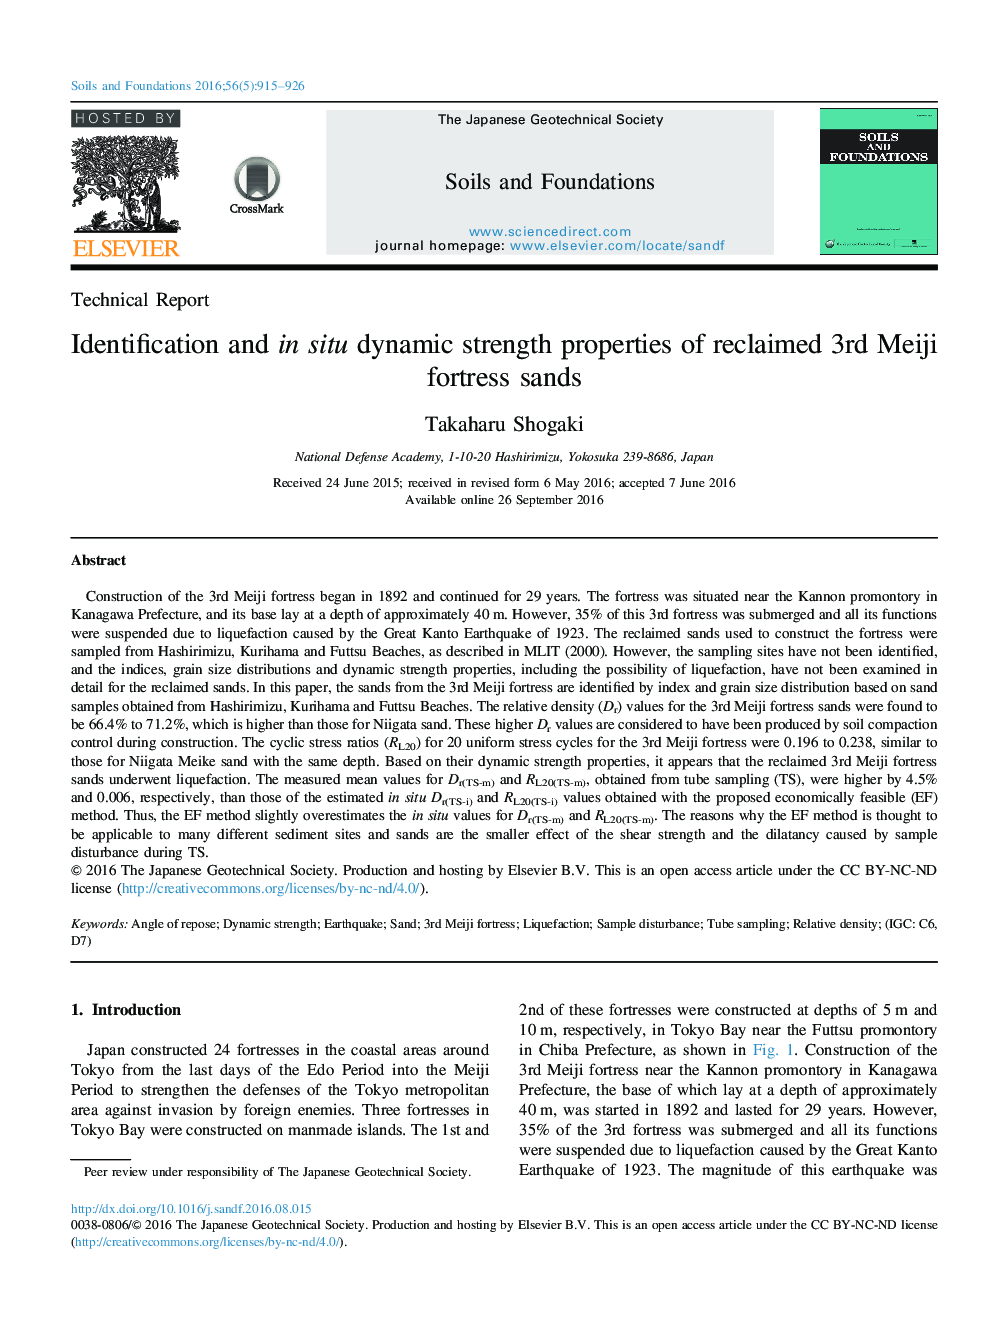 Technical ReportIdentification and in situ dynamic strength properties of reclaimed 3rd Meiji fortress sands